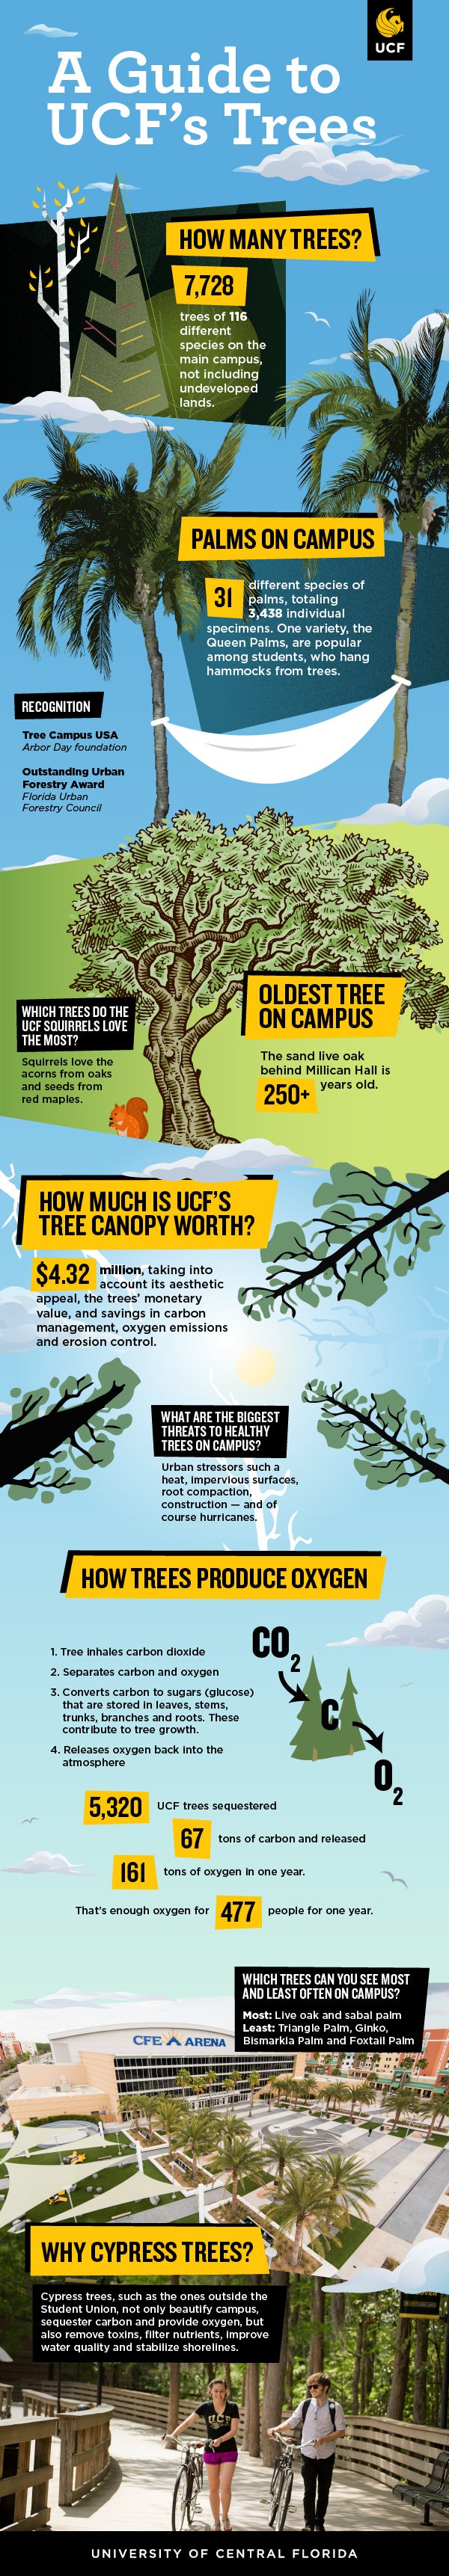 infographic guide to ucf's trees